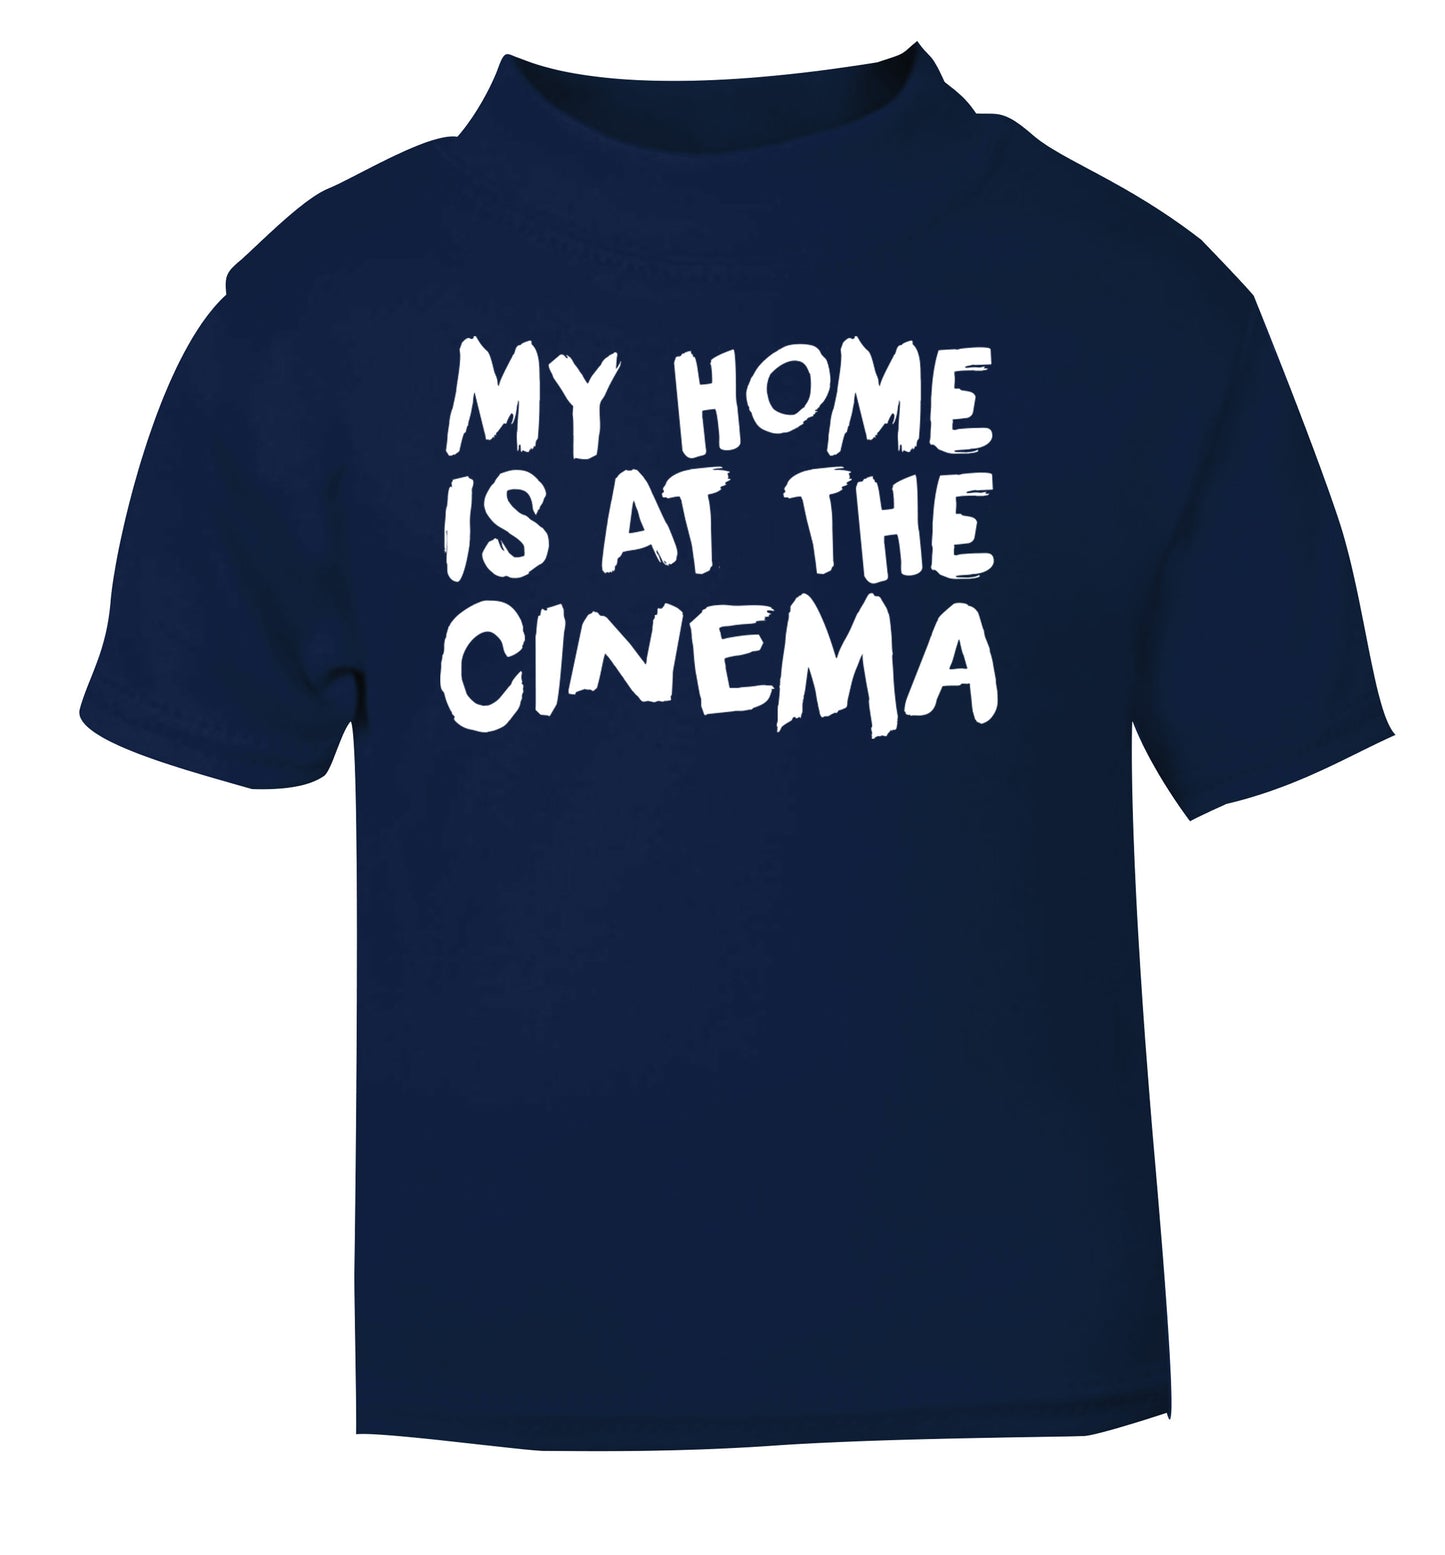 My home is at the cinema navy Baby Toddler Tshirt 2 Years